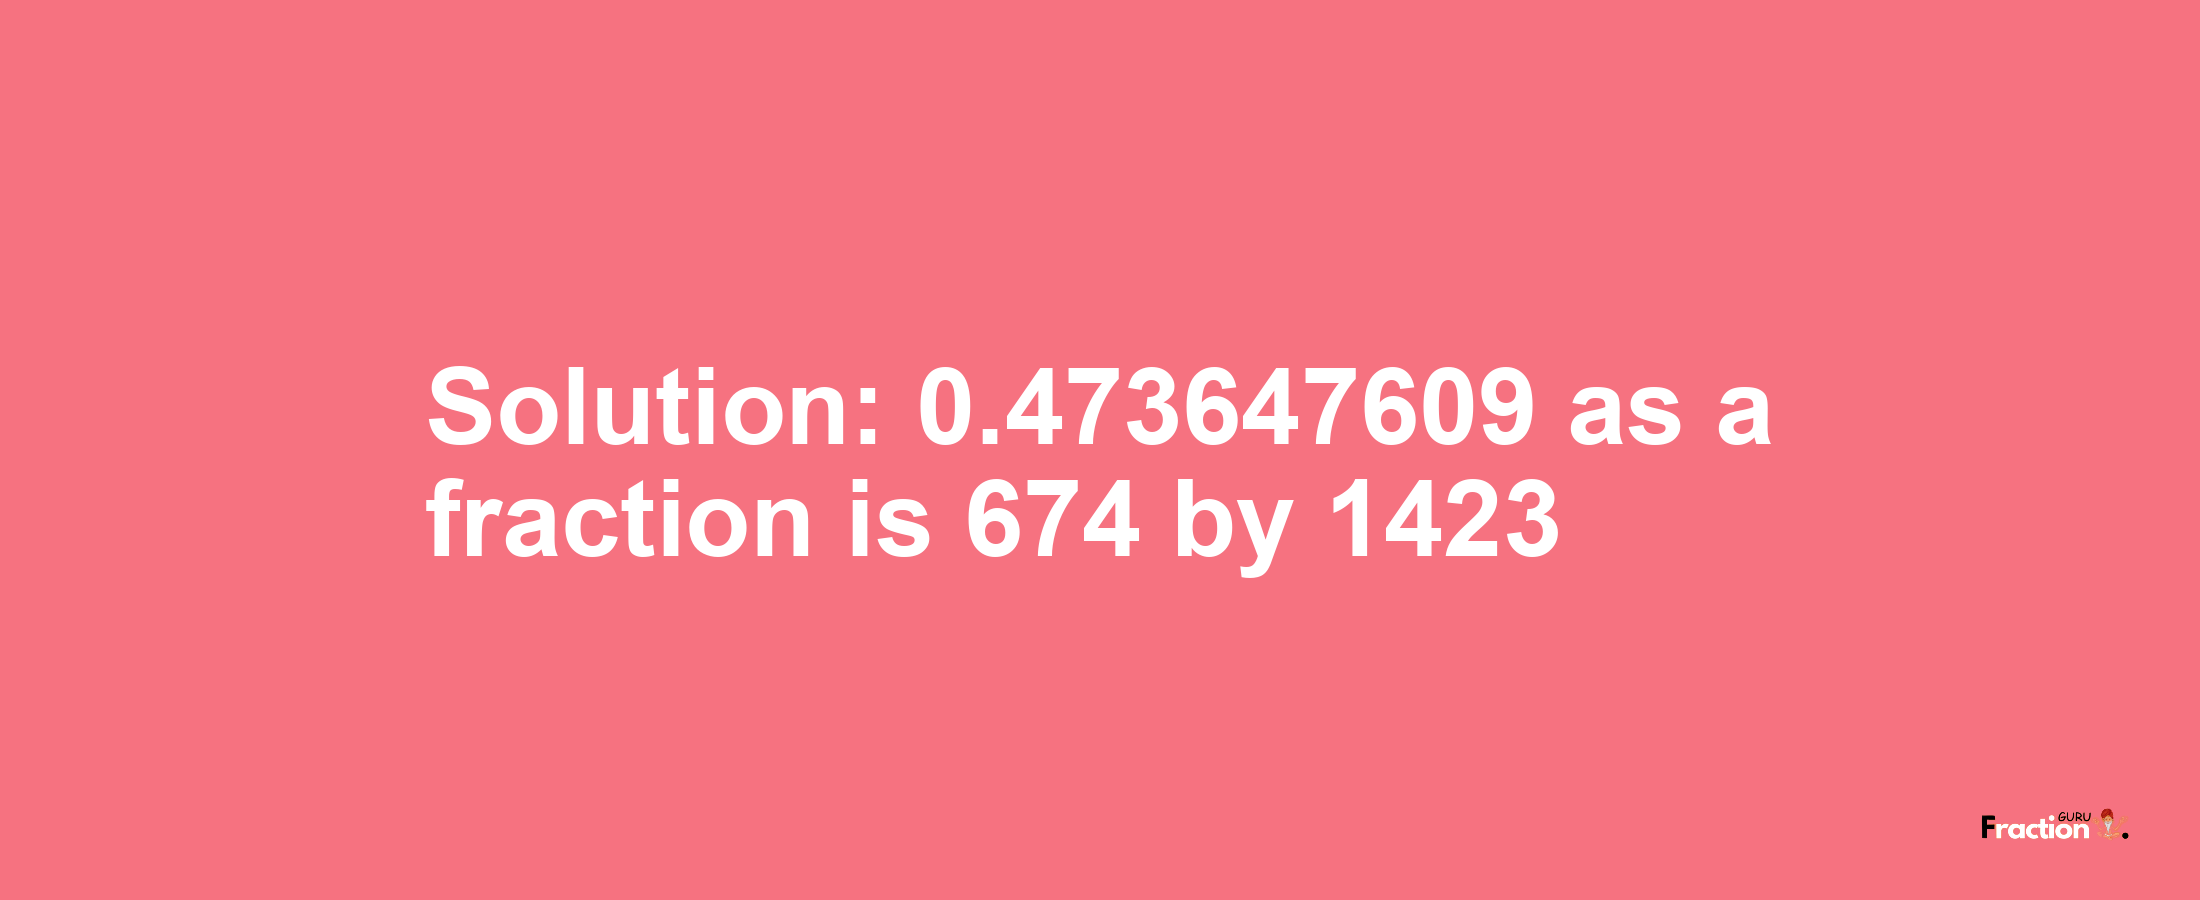 Solution:0.473647609 as a fraction is 674/1423